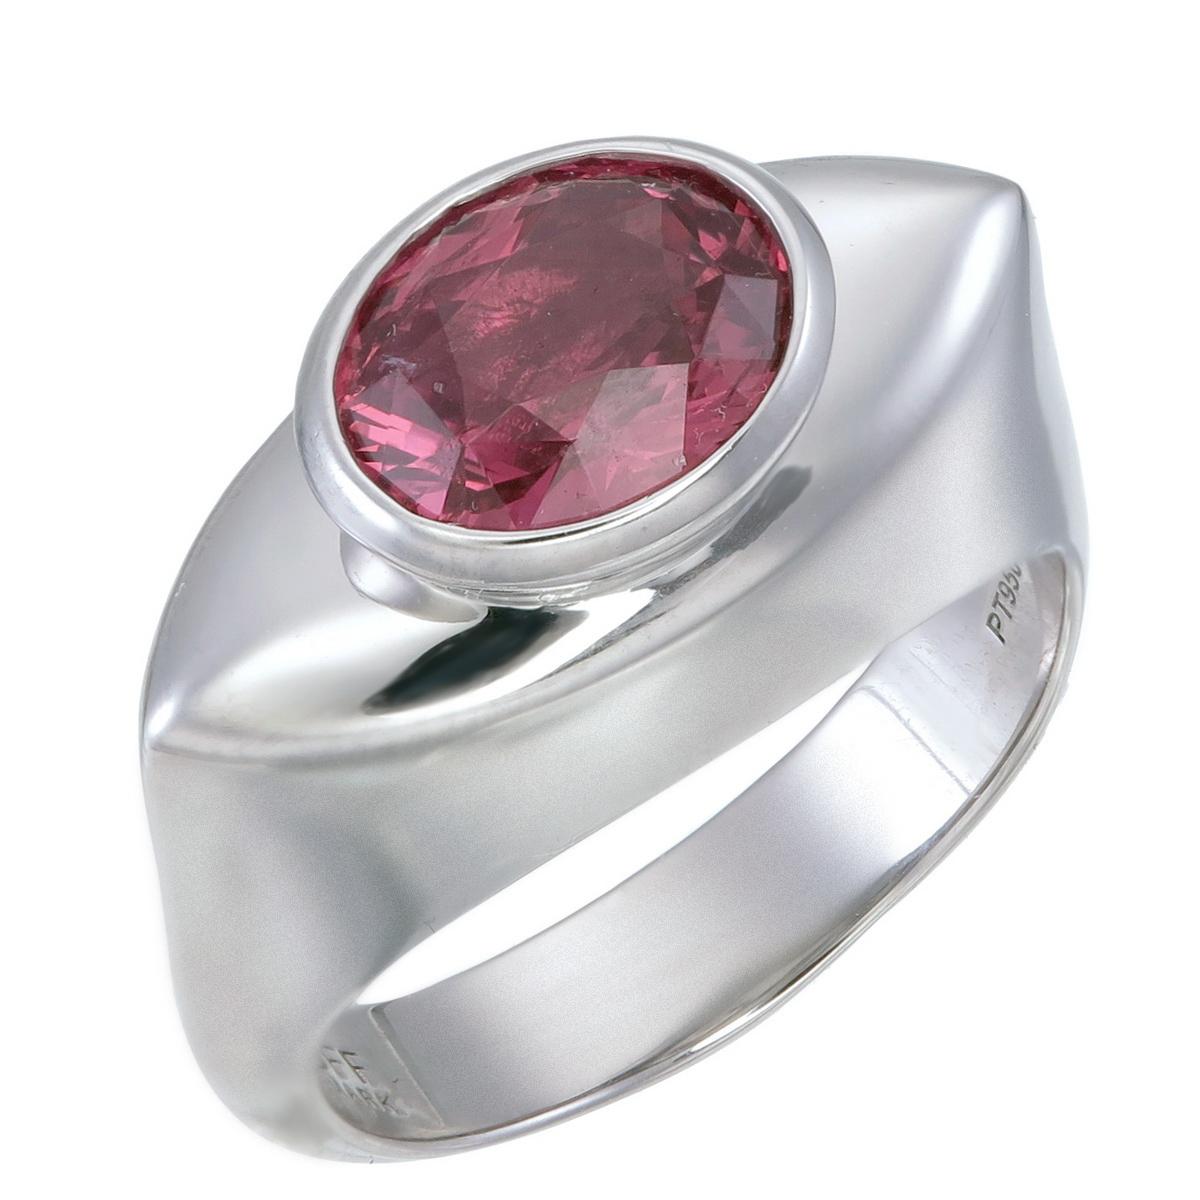 'Kilimanjaro' - A 2.05 Carat Intense Pink, Mahenge Spinel, PT950 Sculpture Ring In New Condition For Sale In Hua Hin, TH